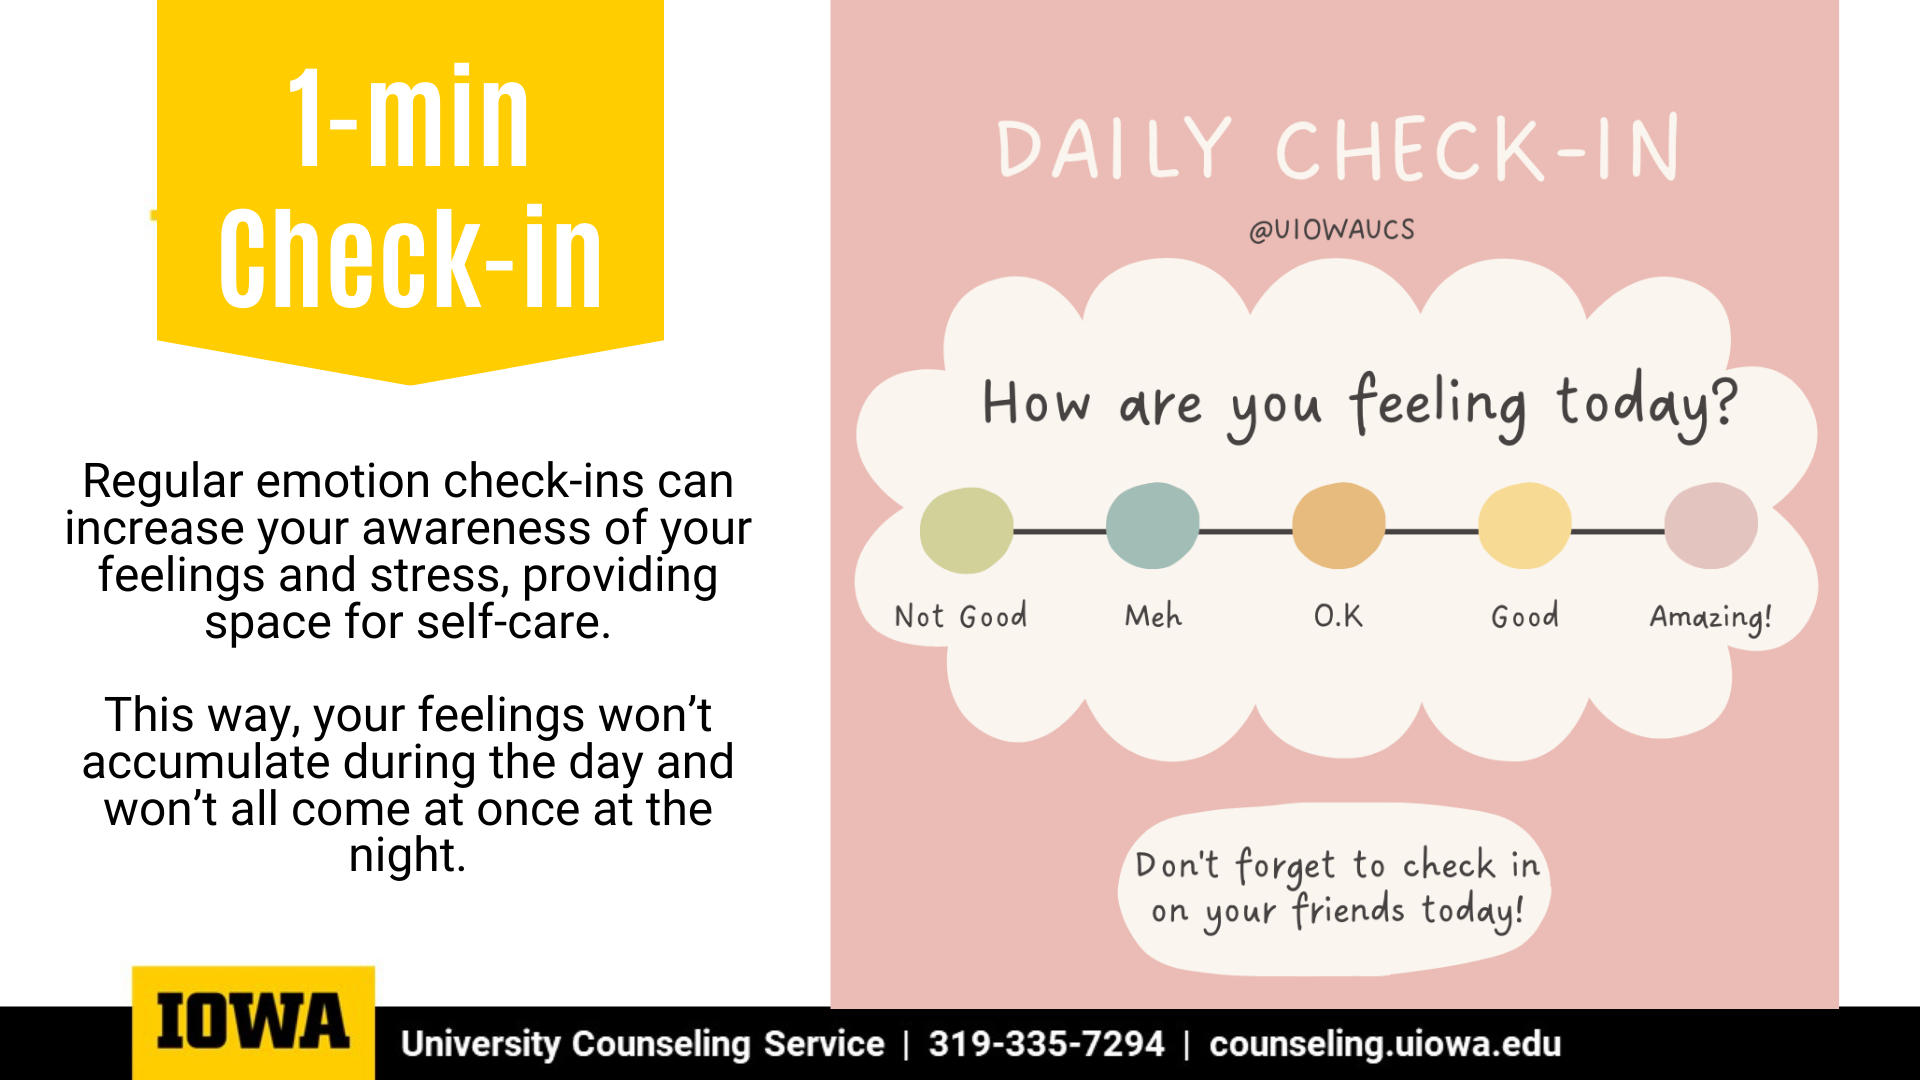 University Counseling Services - Daily Check-In